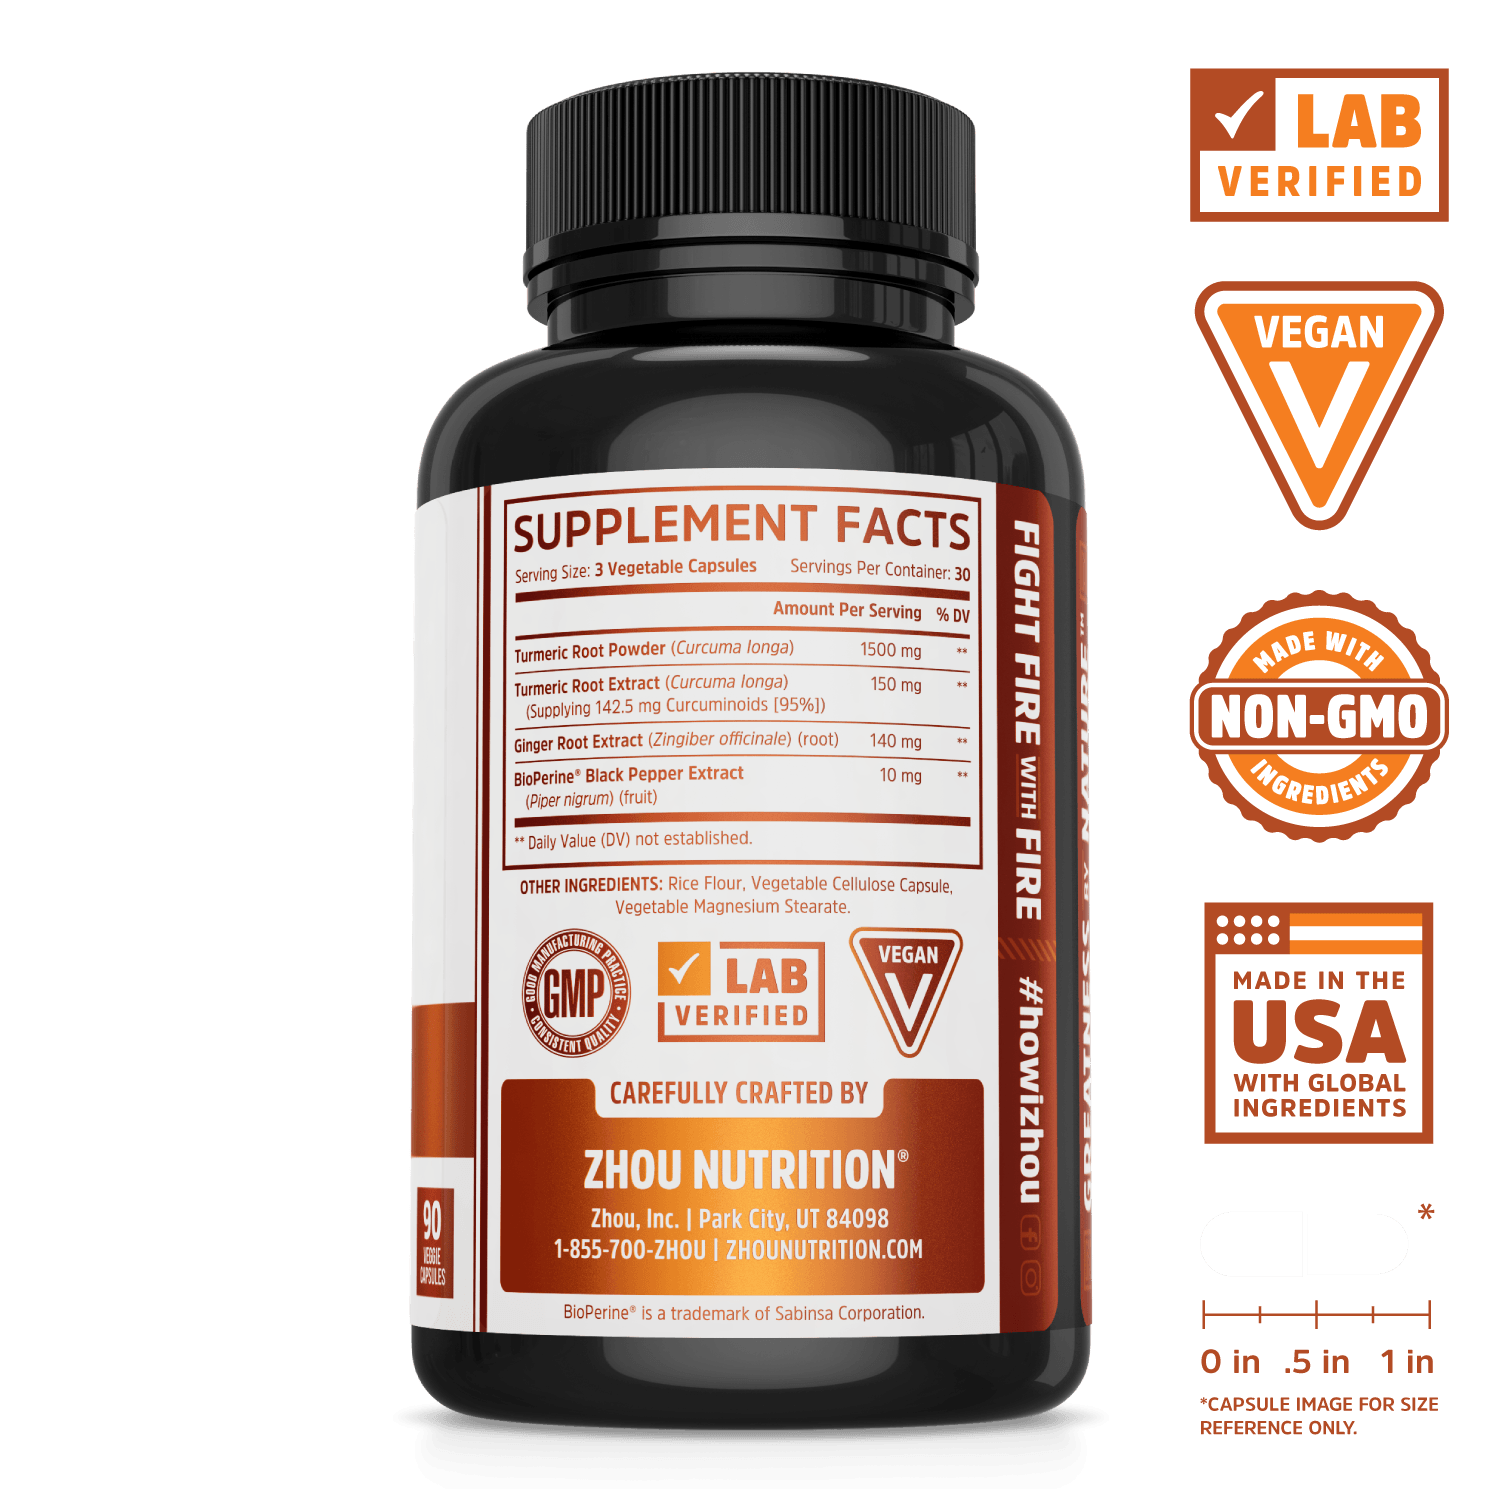 Zhou Nutrition Turmeric Curcumin to Support Mobility. Bottle side. Lab verified, vegan, made with non-GMO ingredients, made in the USA with global ingredients.